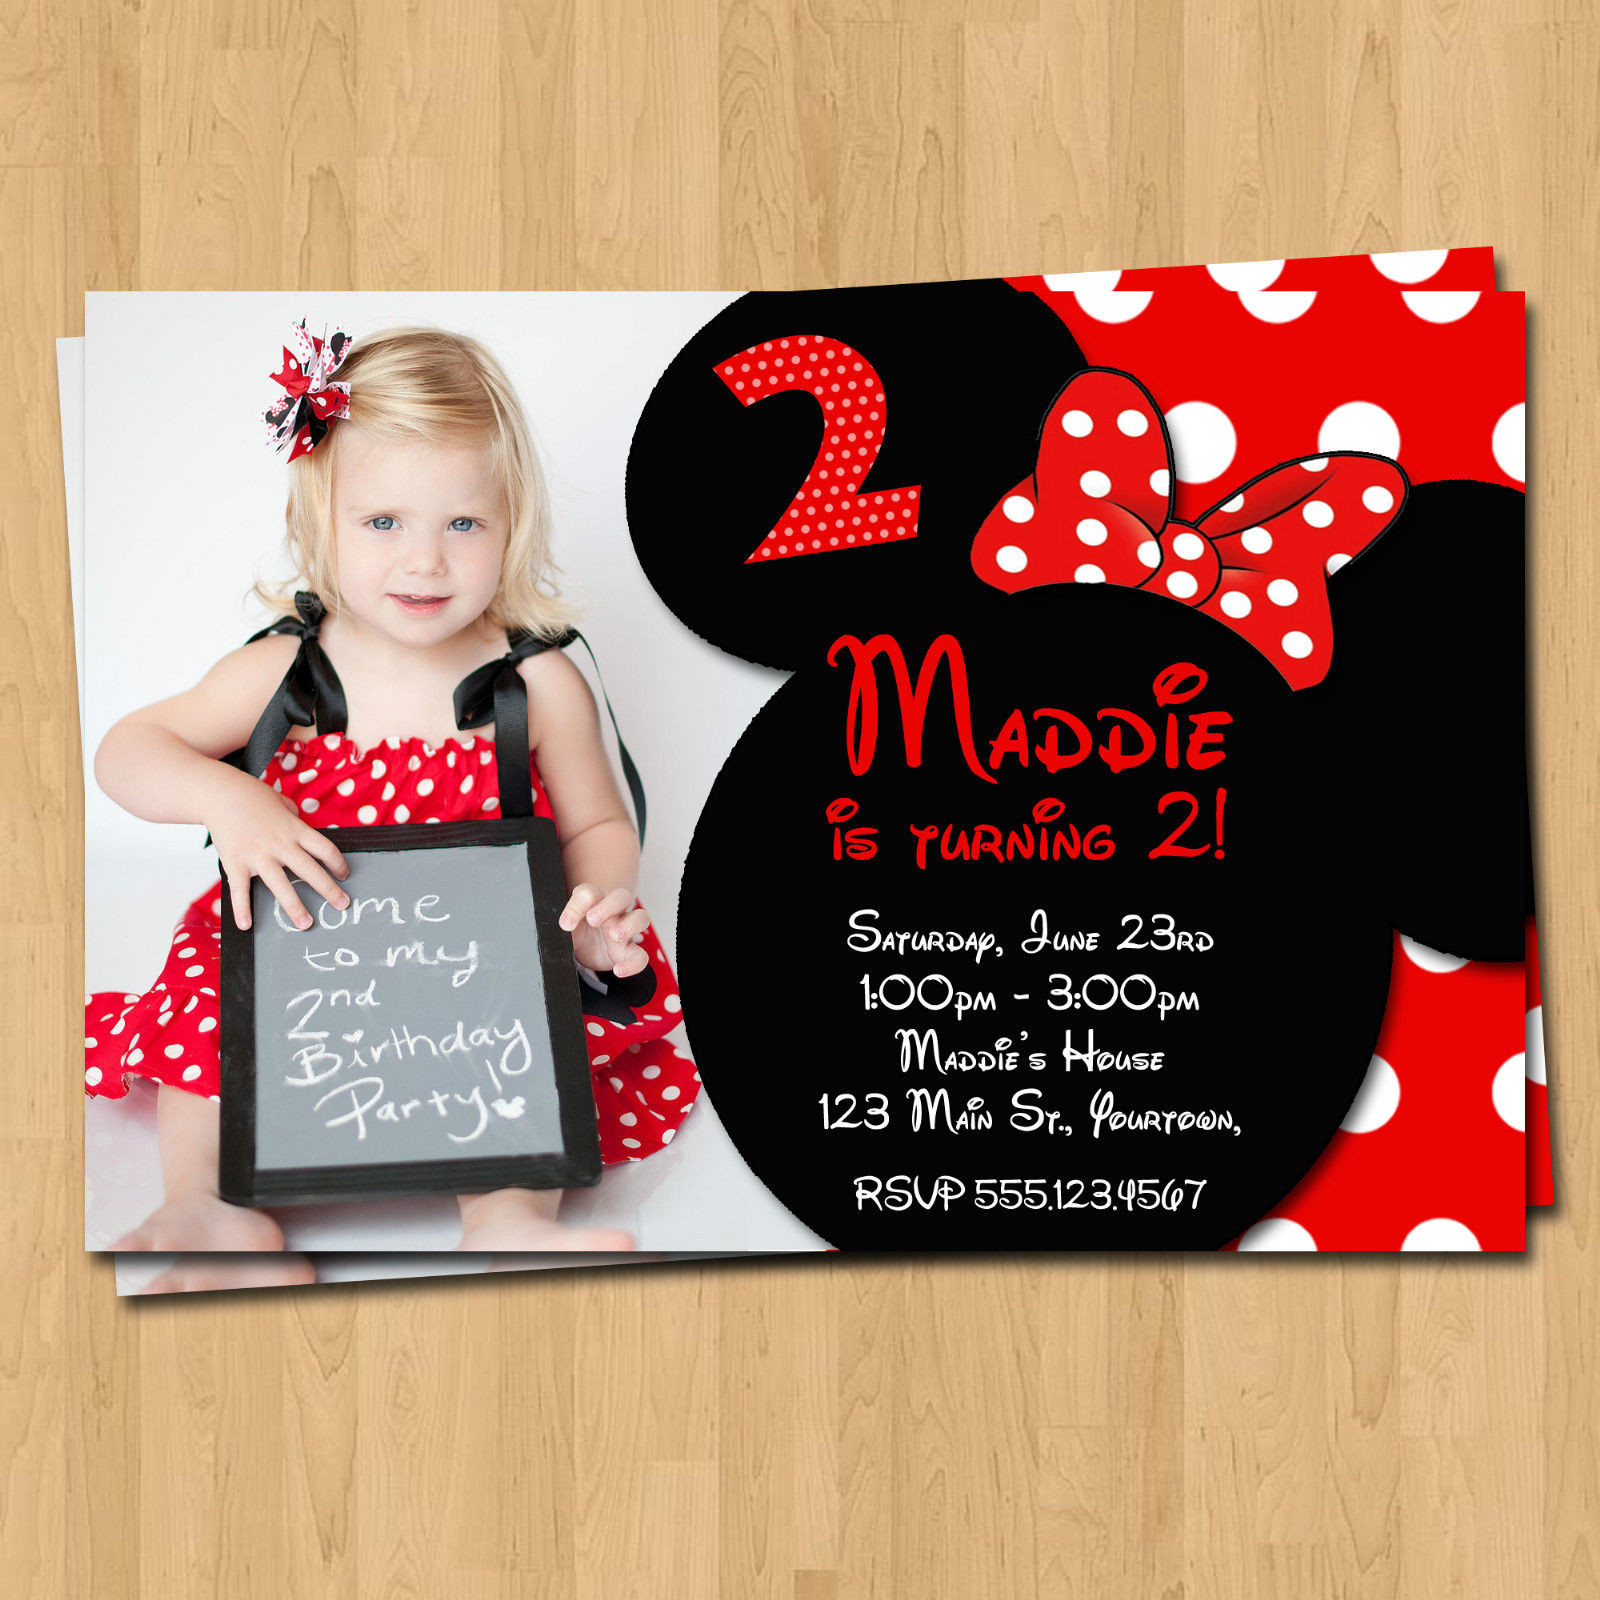 Minnie Mouse Birthday Party Invitations
 Free Printable Minnie Mouse Birthday Party Invitations